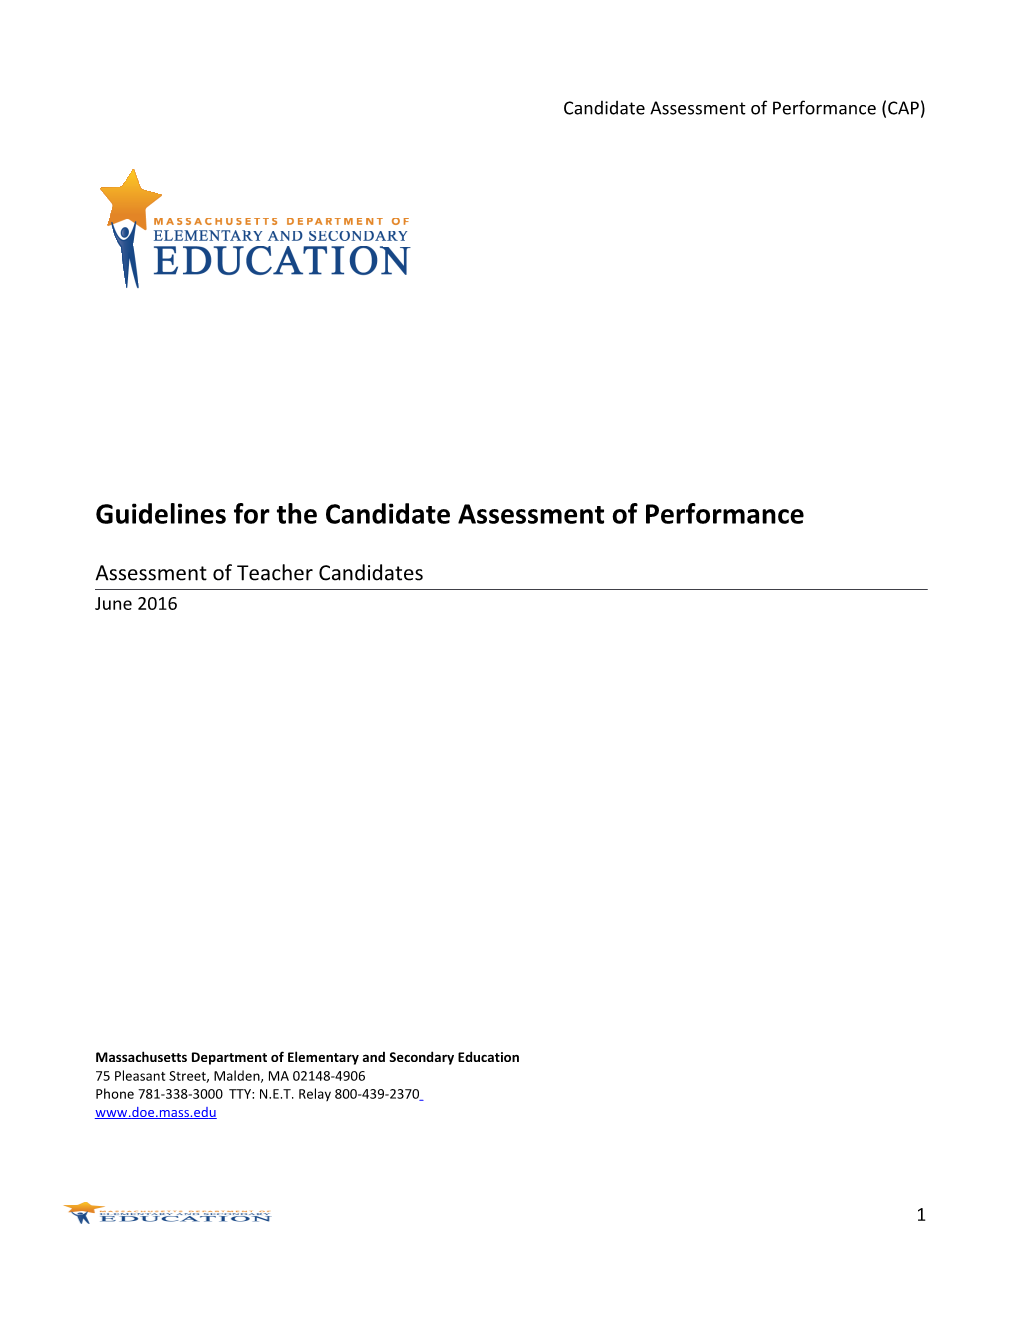 Candidate Assessment of Performance Guidelines